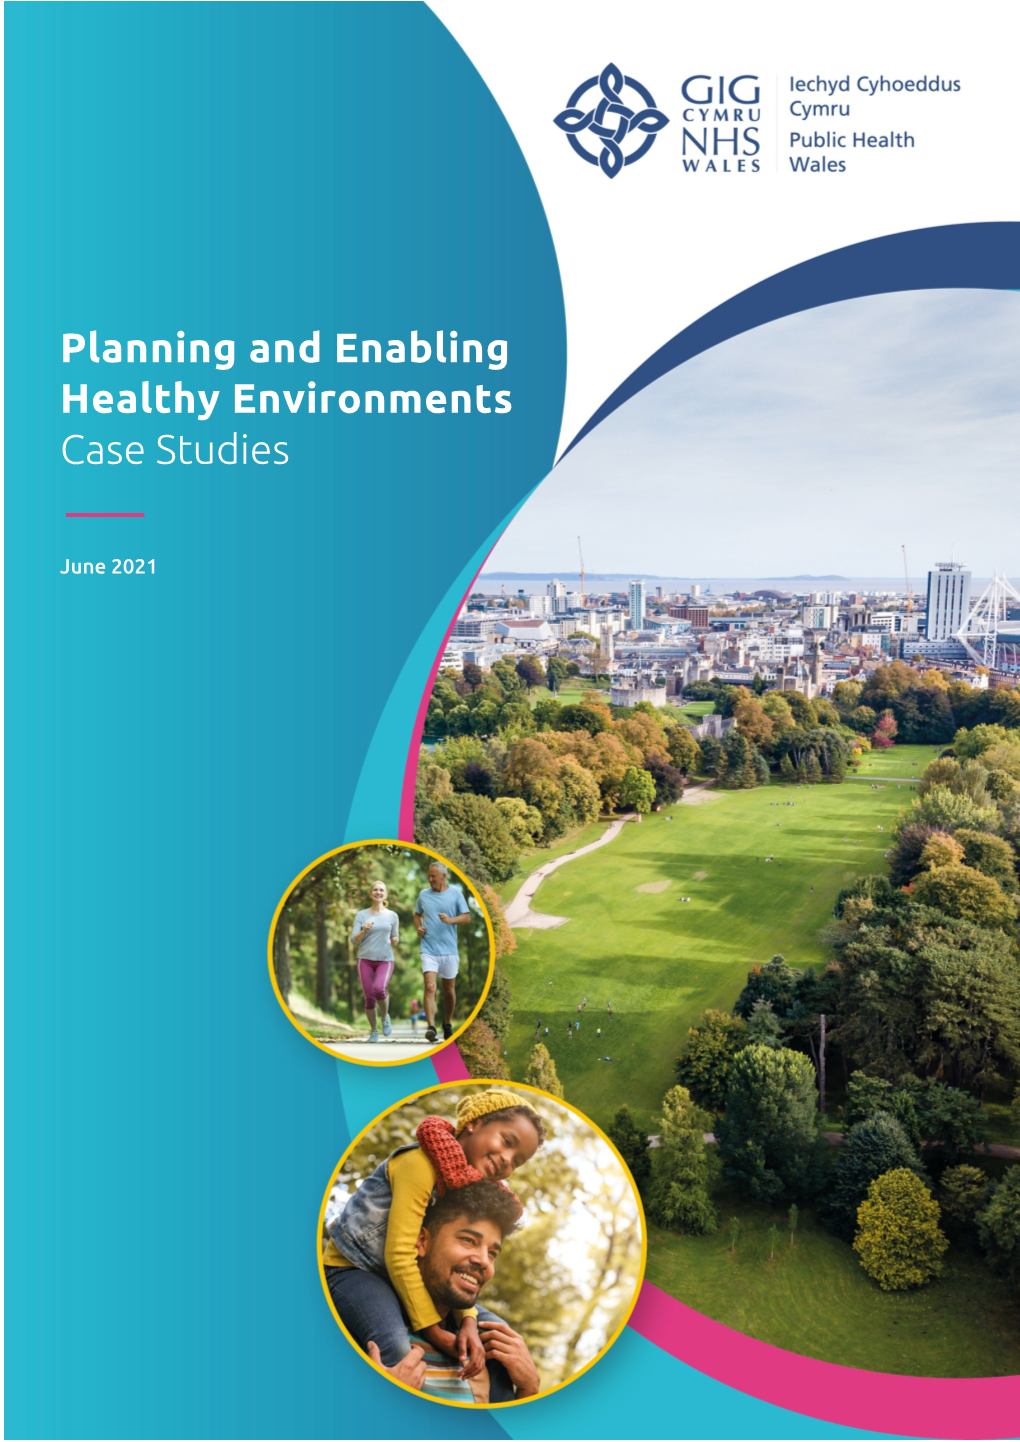 Planning and Enabling Healthy Environments Case Studies